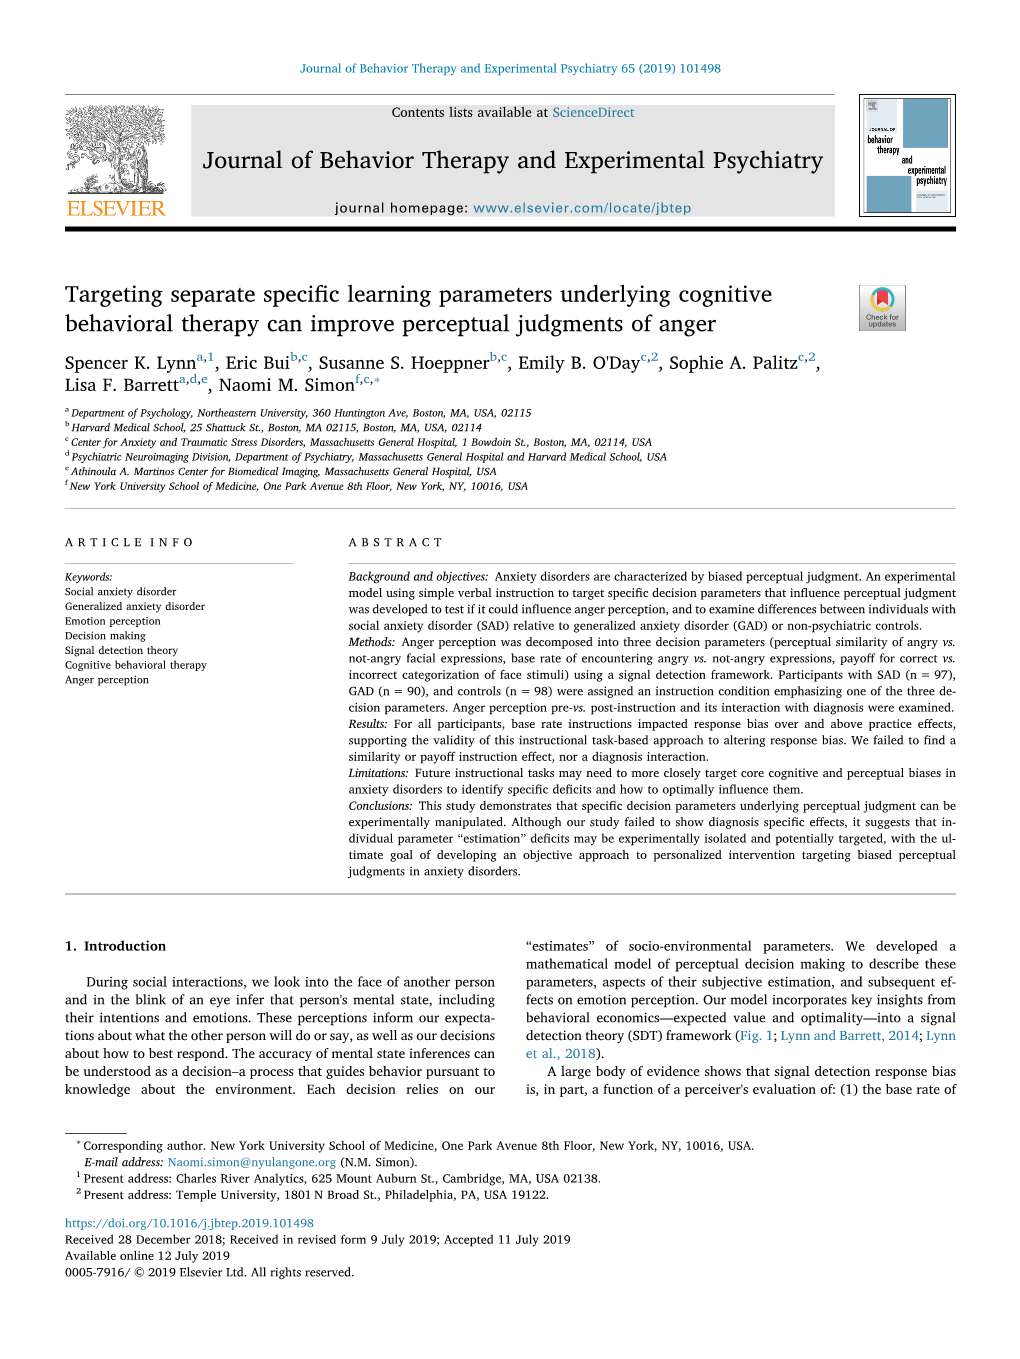 Targeting Separate Specific Learning Parameters Underlying Cognitive